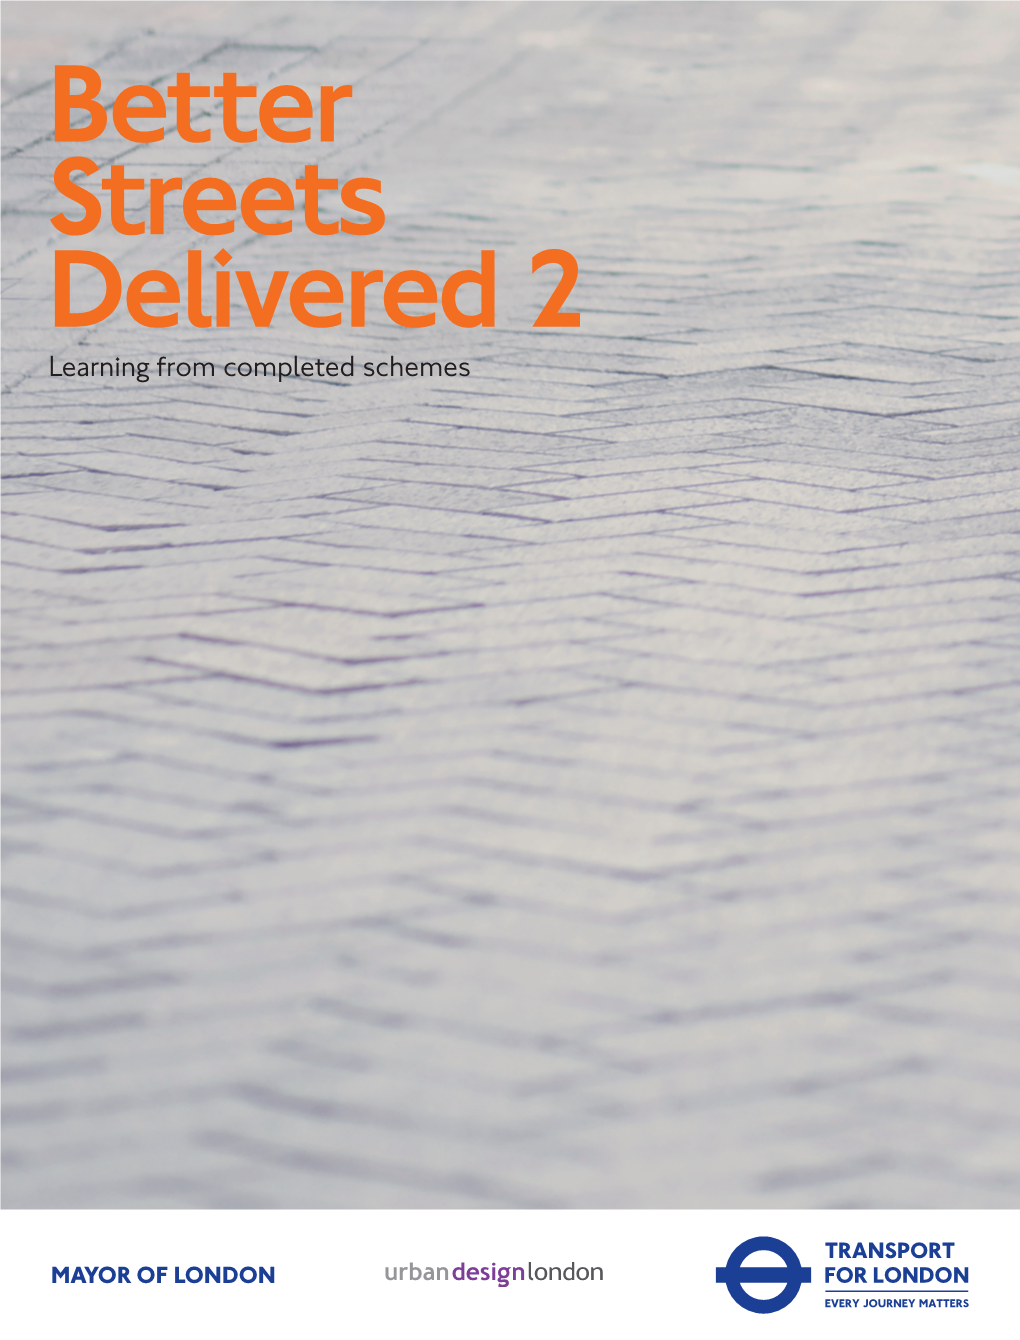 Better Streets Delivered 2 Better This Document Is a Research Document and Its Content Does Not Represent Adopted Policy